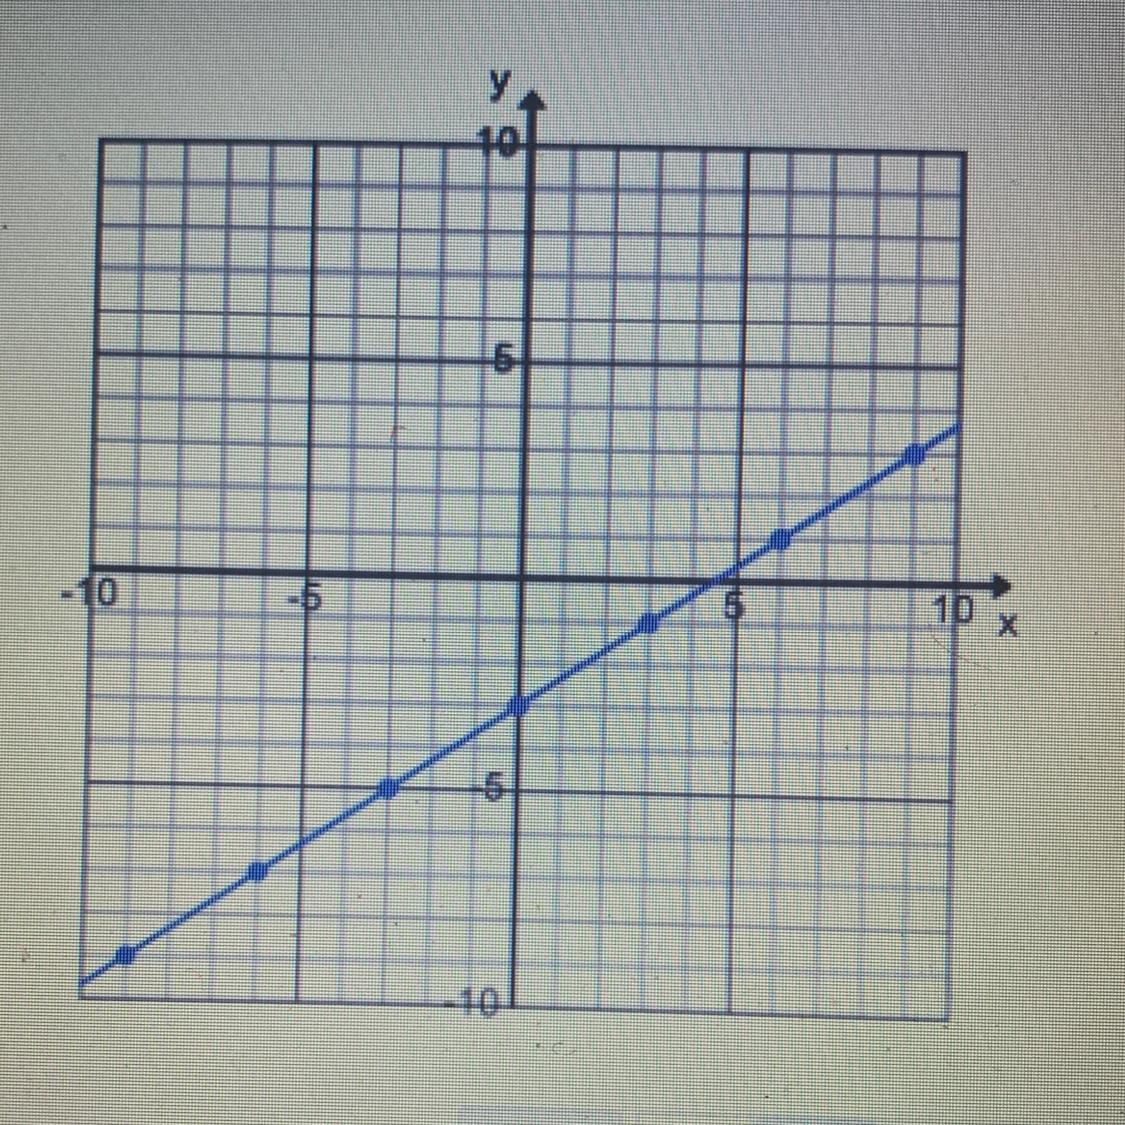 What Is The Slope Of This Line?2/3 1/3 -1/3 -2/3 